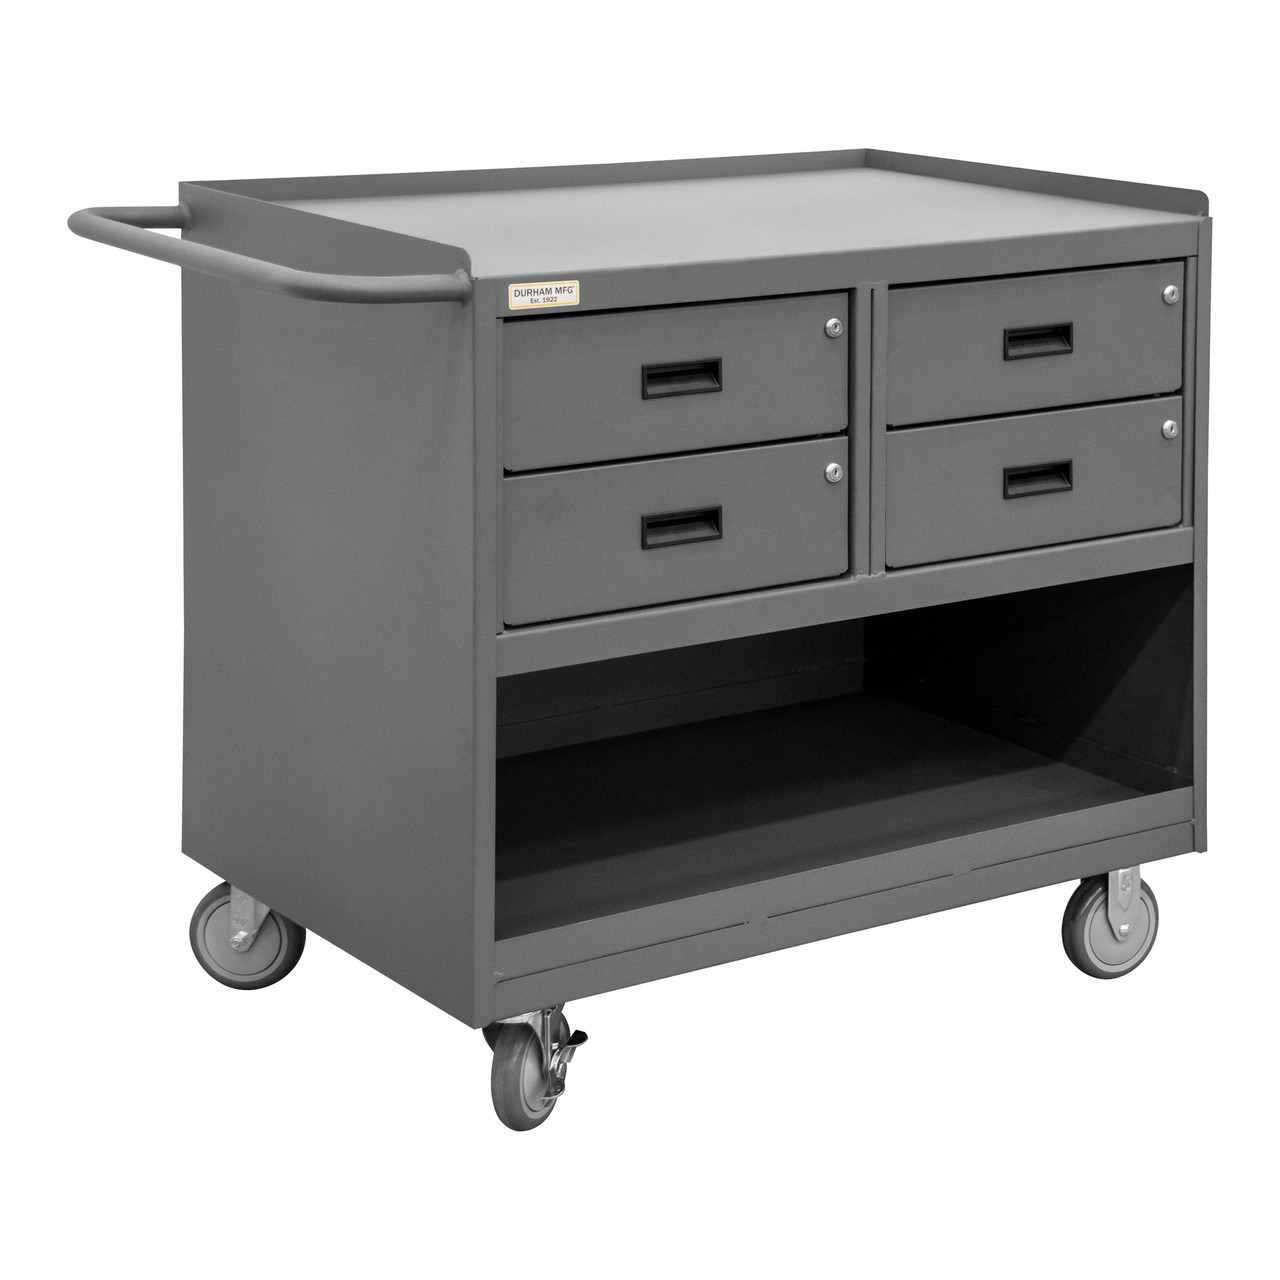 Mobile Bench Cabinet With 5" x 1-1/4" Polyurethane Casters, (2) Rigid, (2) Swivel, 1 Shelf, 4 Drawers, Steel Top Work Surface With Top Lip Down, Tubular Push Handle, Gray